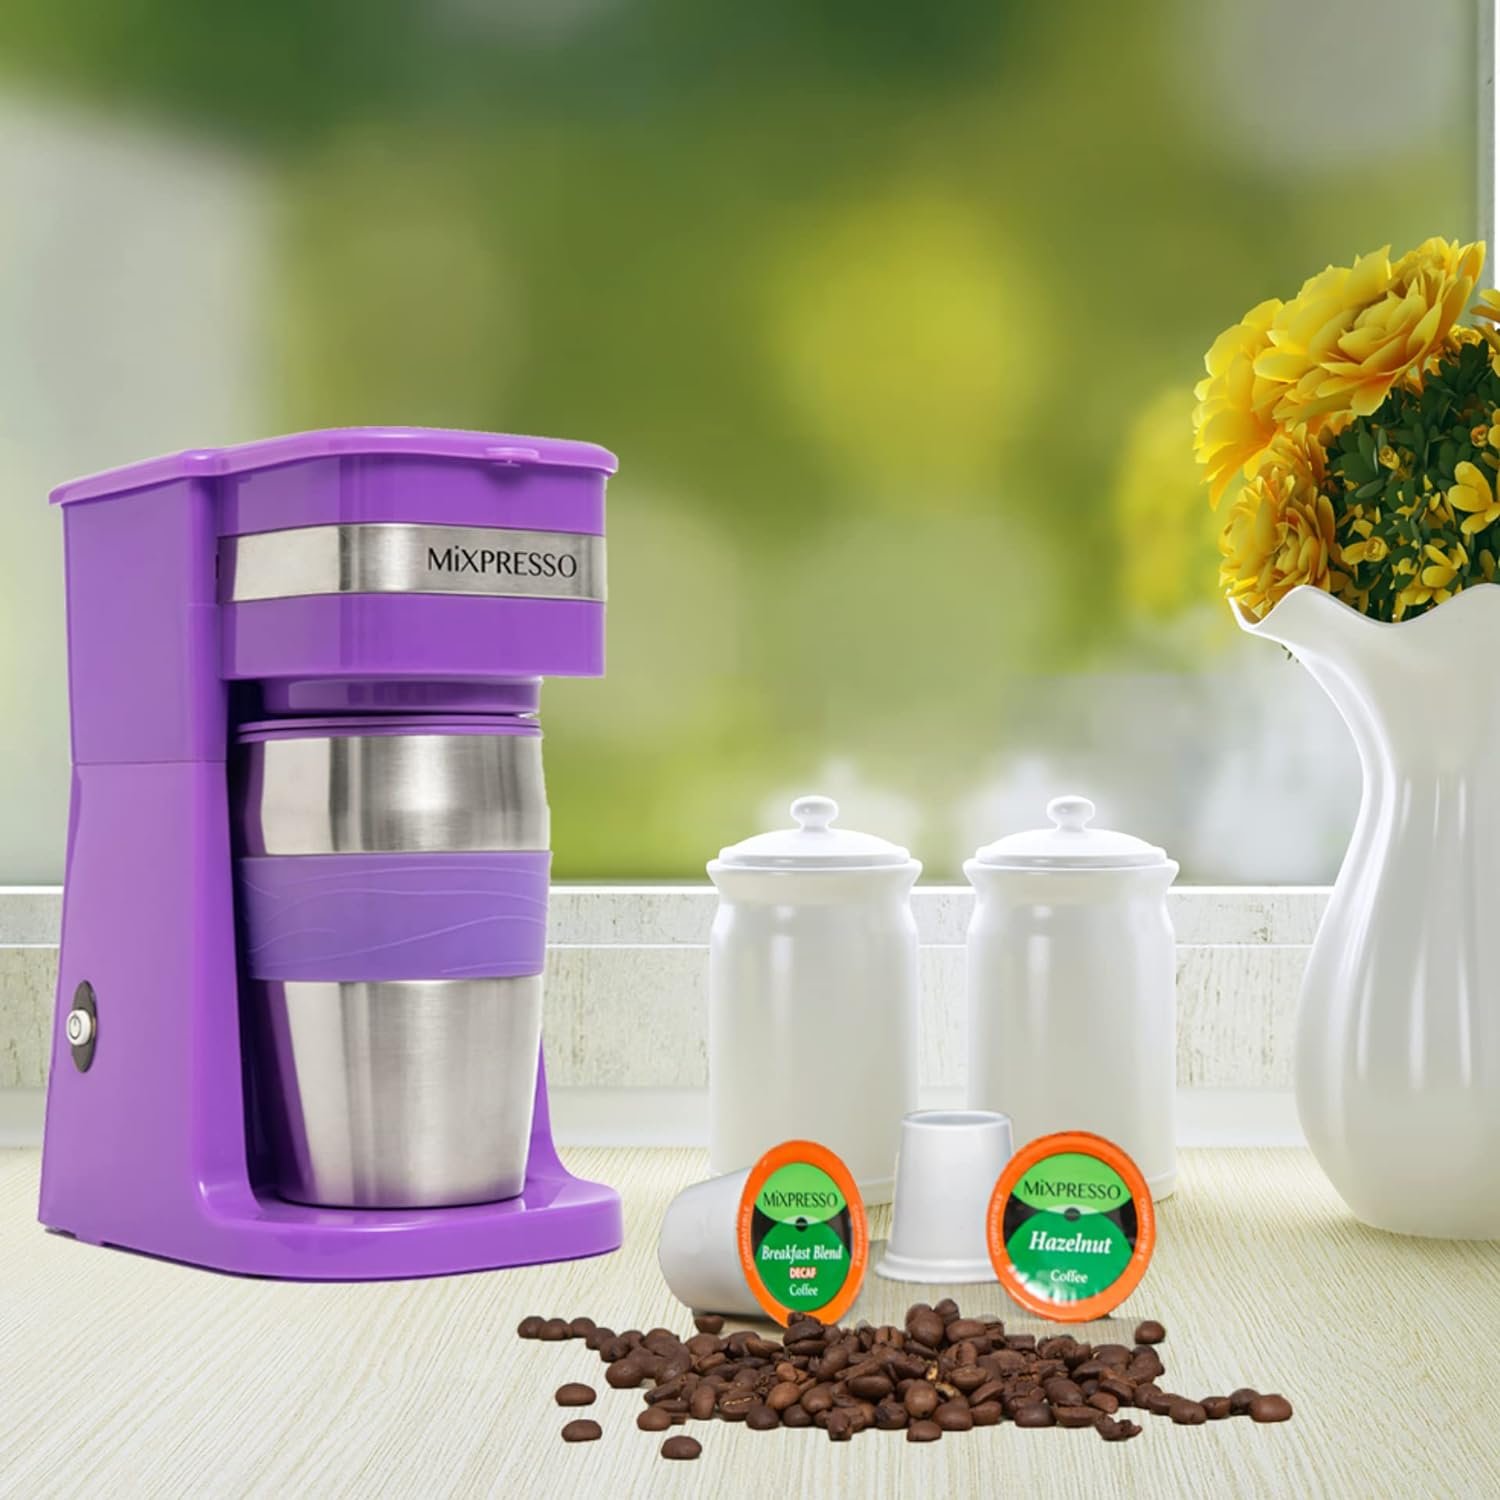 Mixpresso 2-In-1 Coffee Maker Review